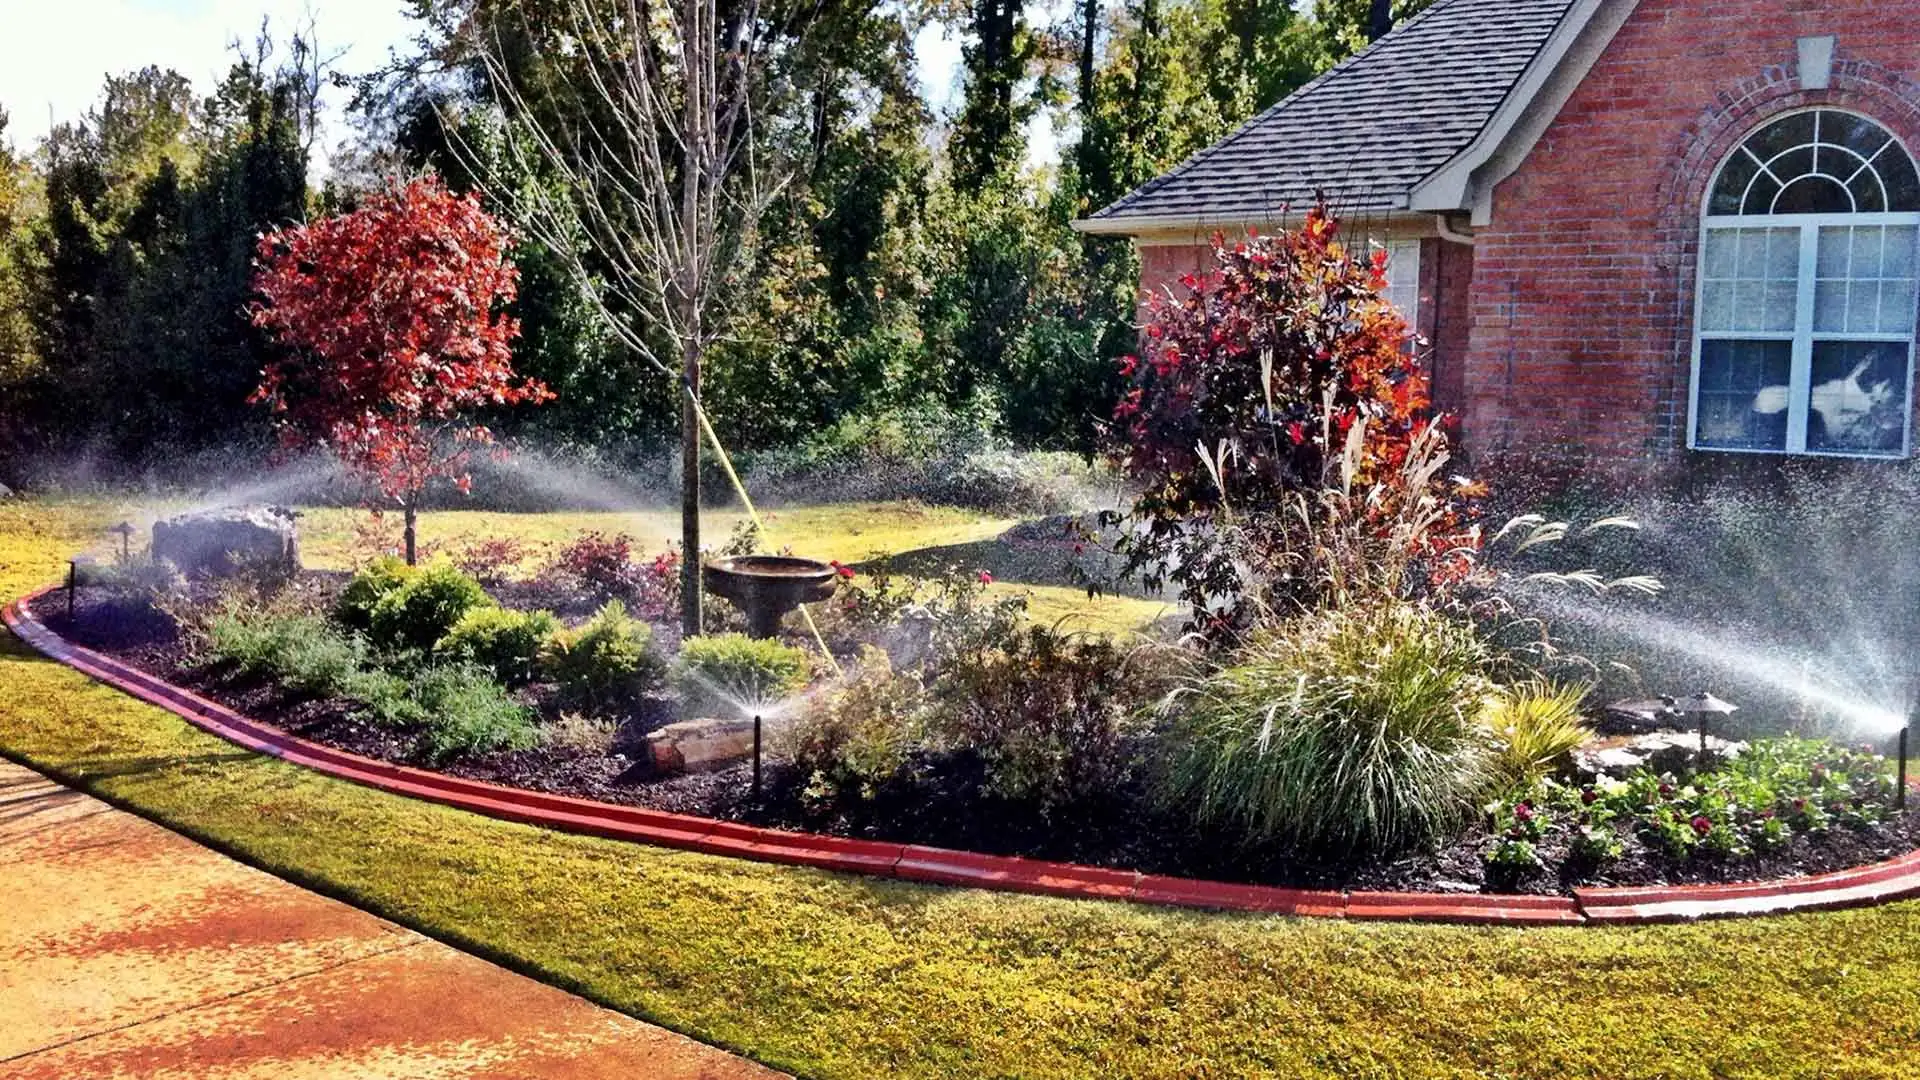 New landscape bed renovation being watered at a home in Bartlett, TN.